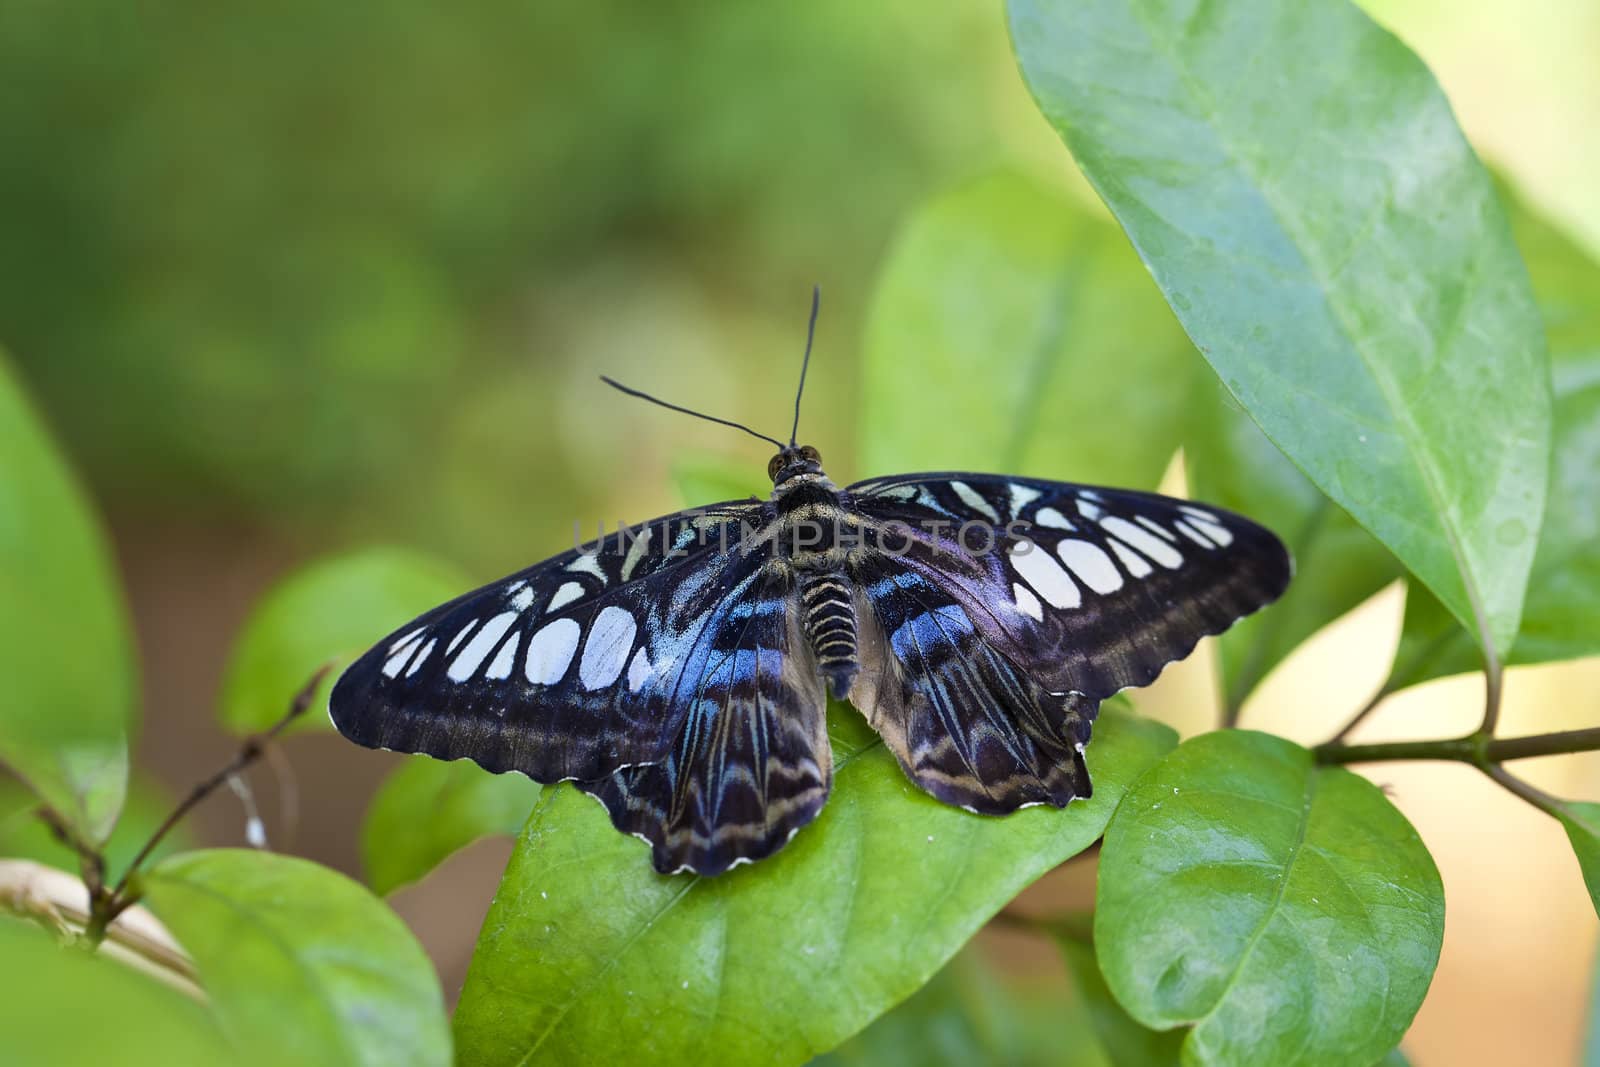 A close up shot of a clipper butterfly (Parthenos sylvia). These butterflies are found in South Asia.